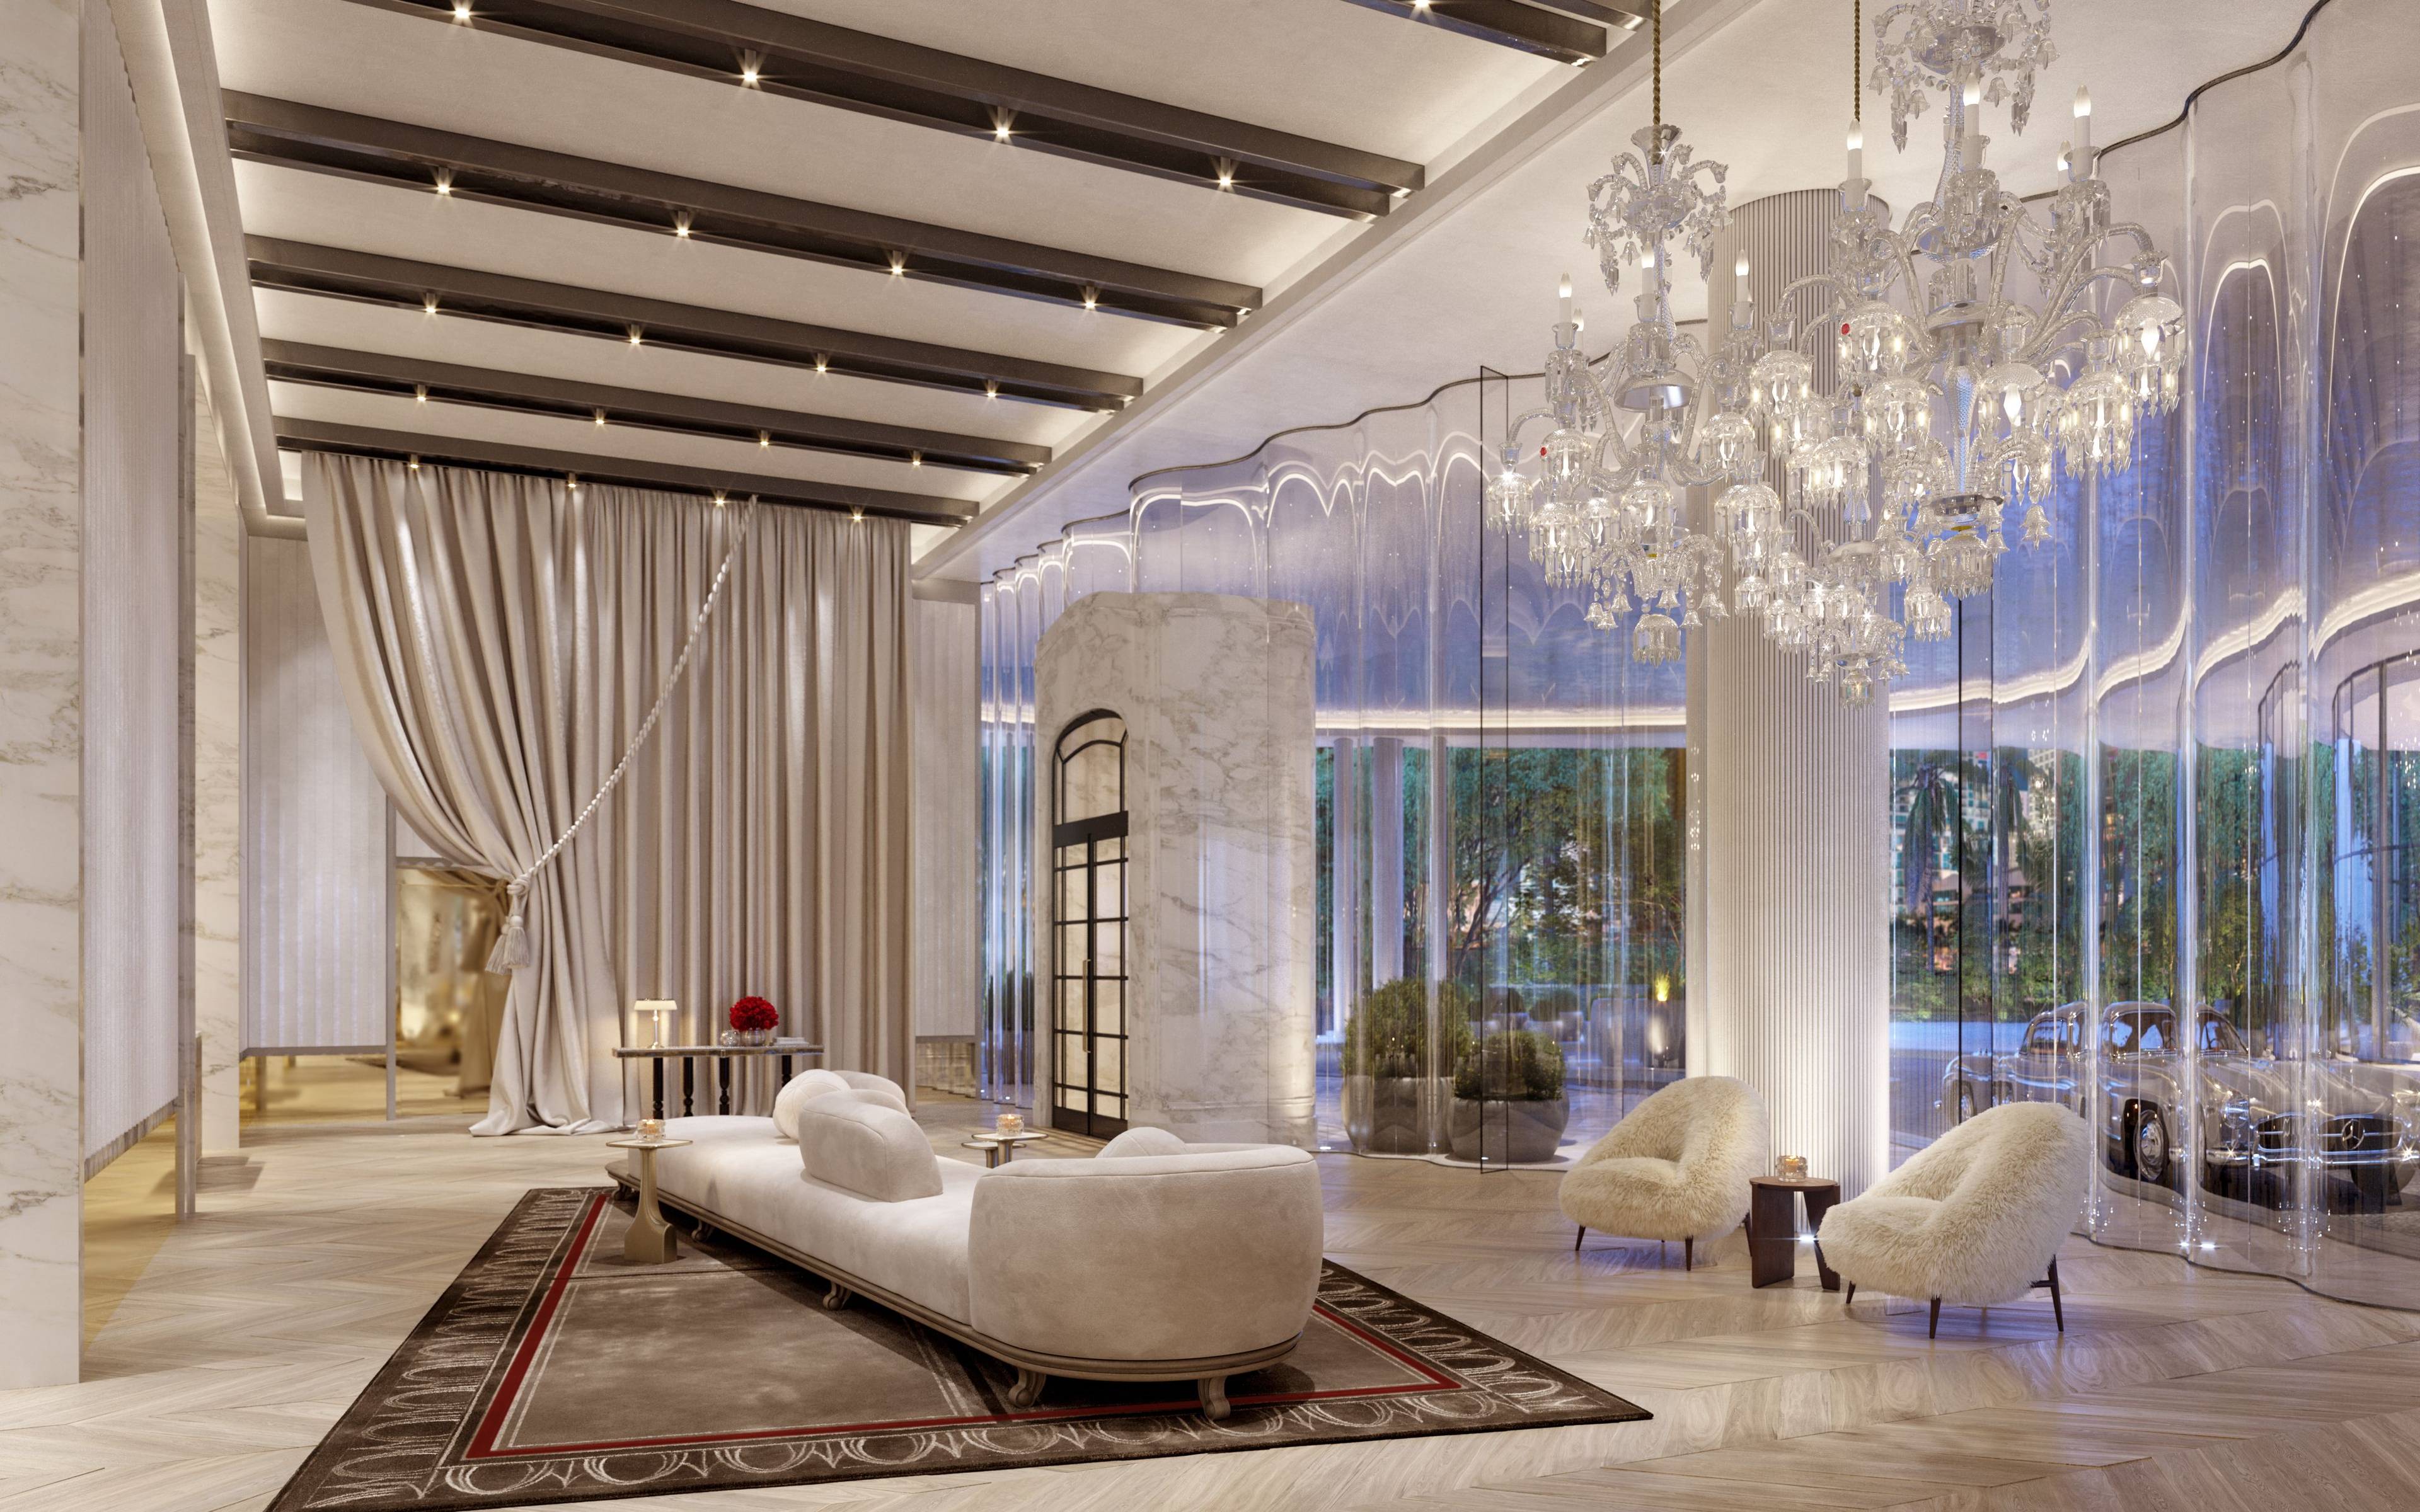 Stunning Waterfront Luxury 4 Beds | 4.5 Baths Condo at Baccarat Residences | Miami |Brickell